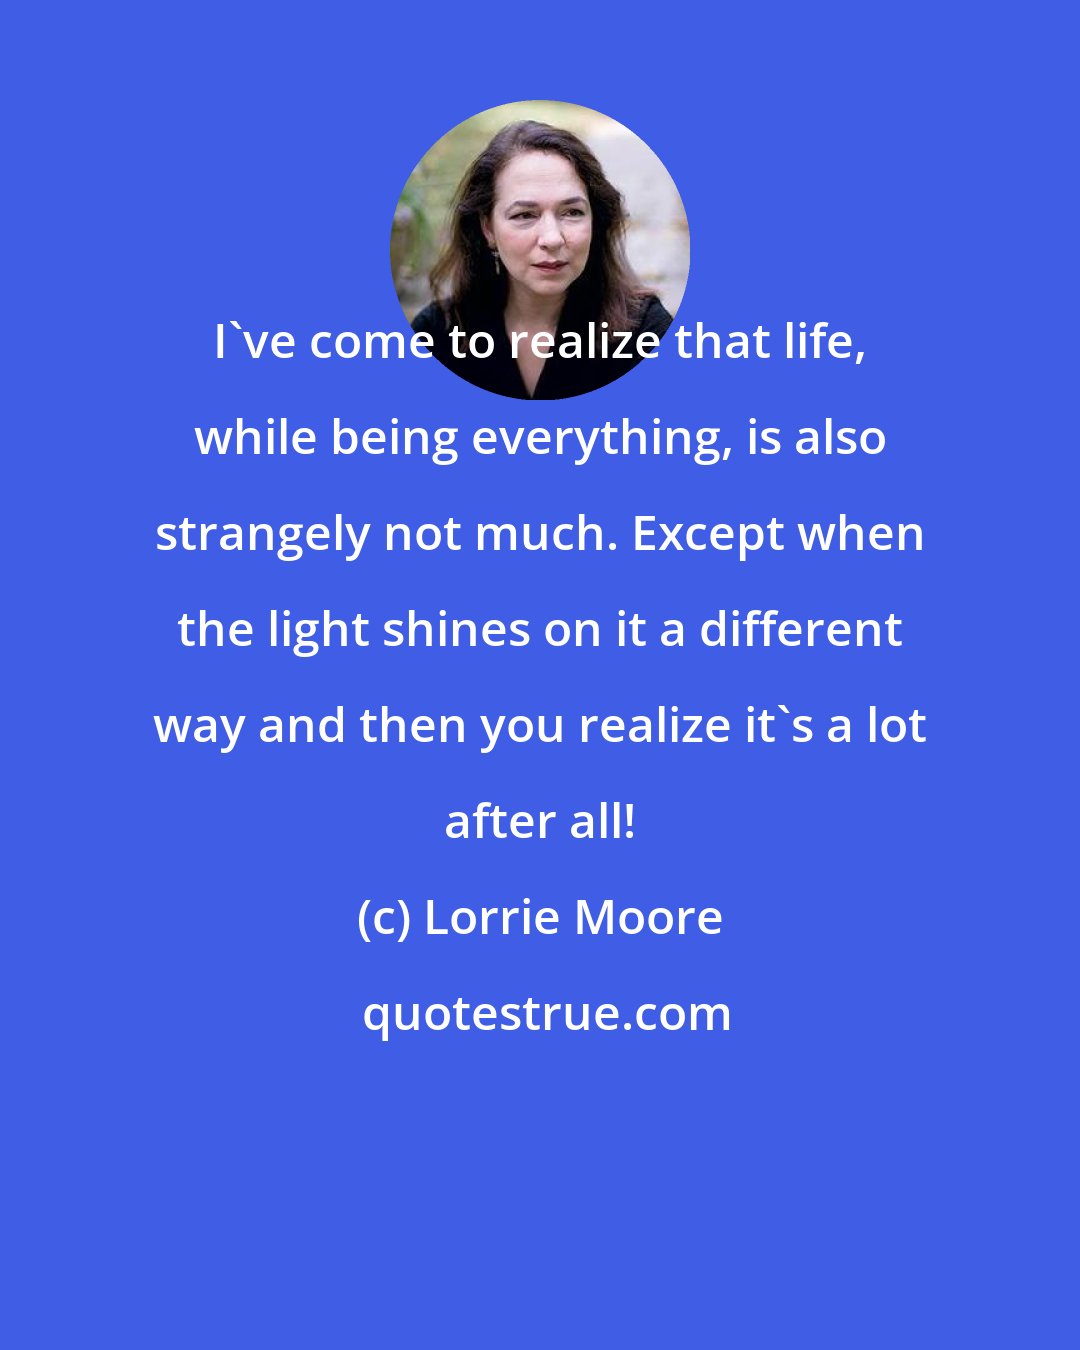 Lorrie Moore: I've come to realize that life, while being everything, is also strangely not much. Except when the light shines on it a different way and then you realize it's a lot after all!